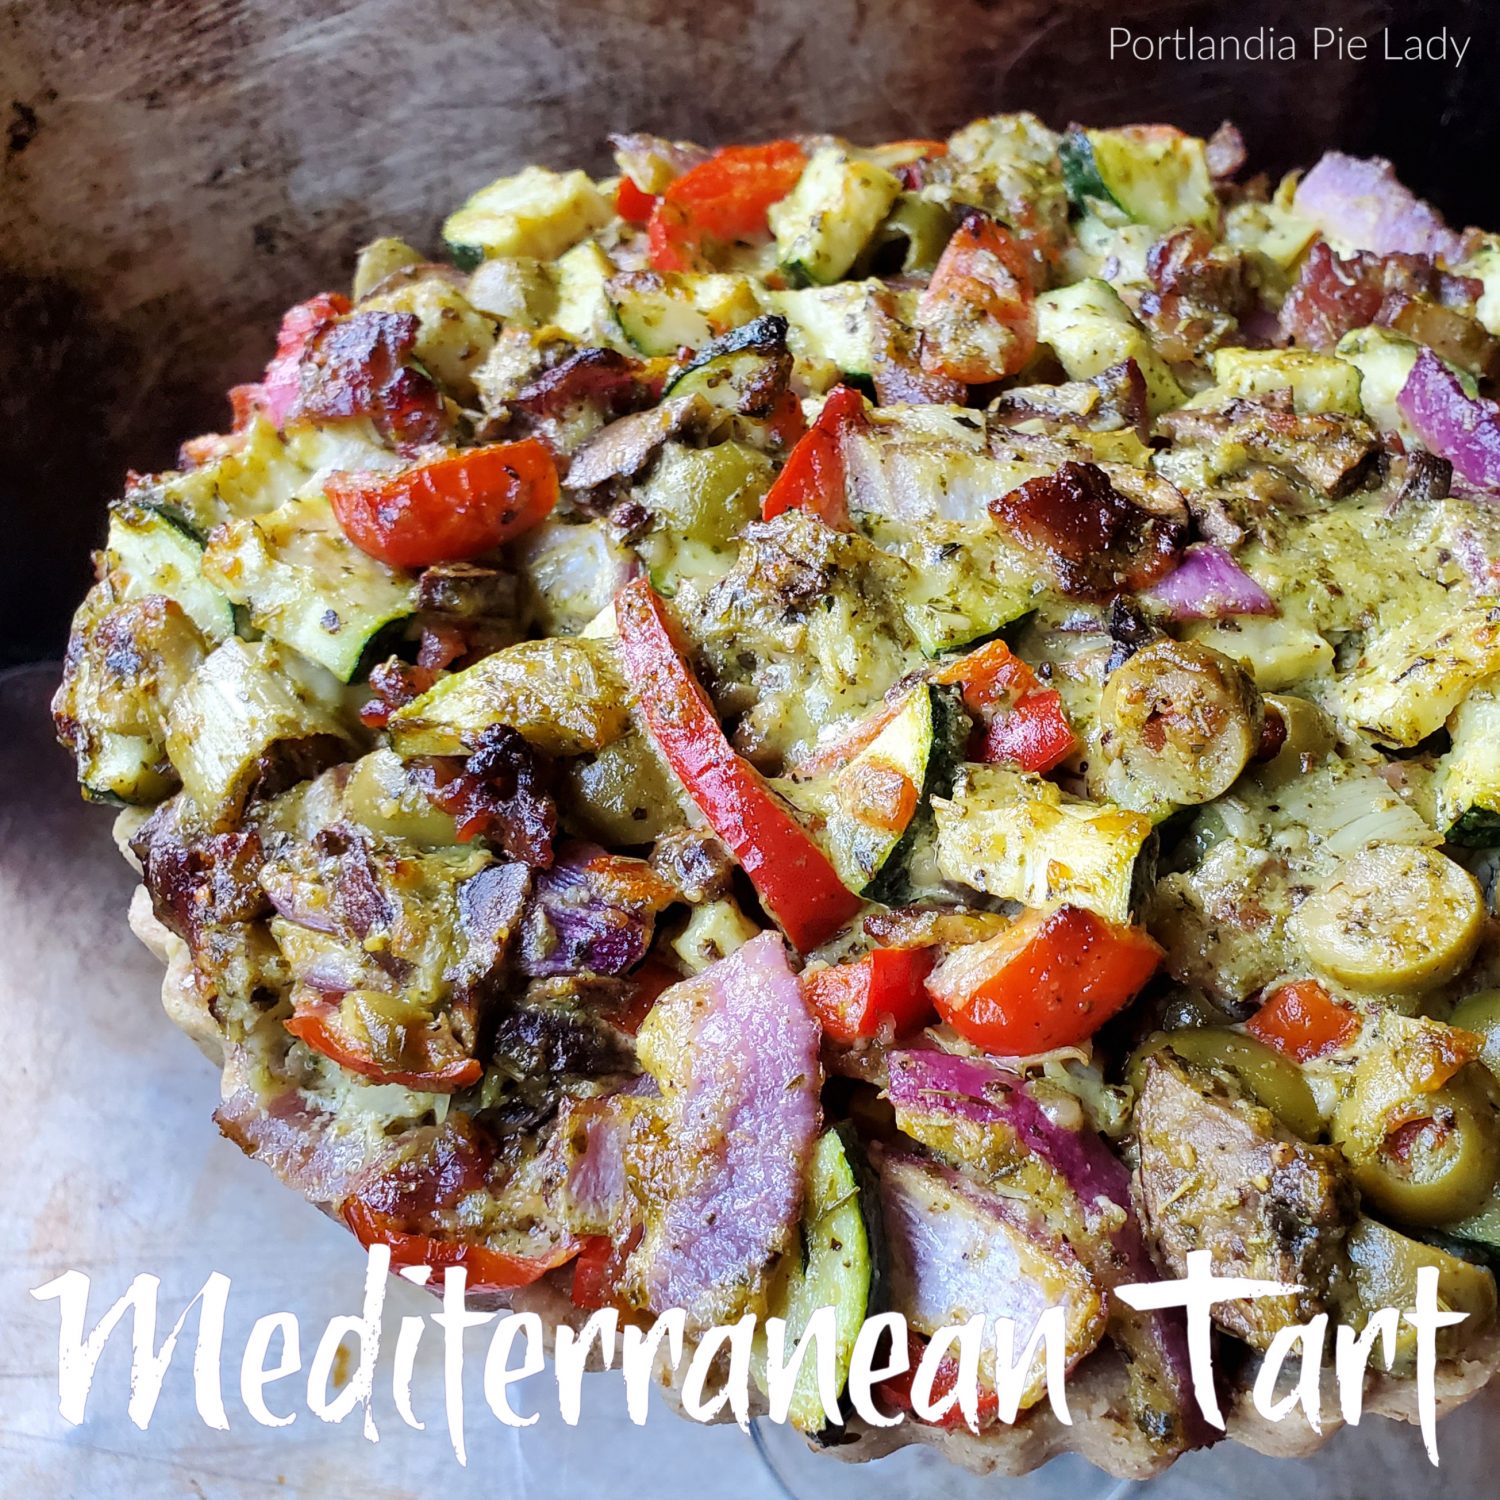 Mediterranean vegetables tossed with a flavorful creamy pesto sauce and seasonings which bakes up tender crisp,with a savory walnut-almond crust. 